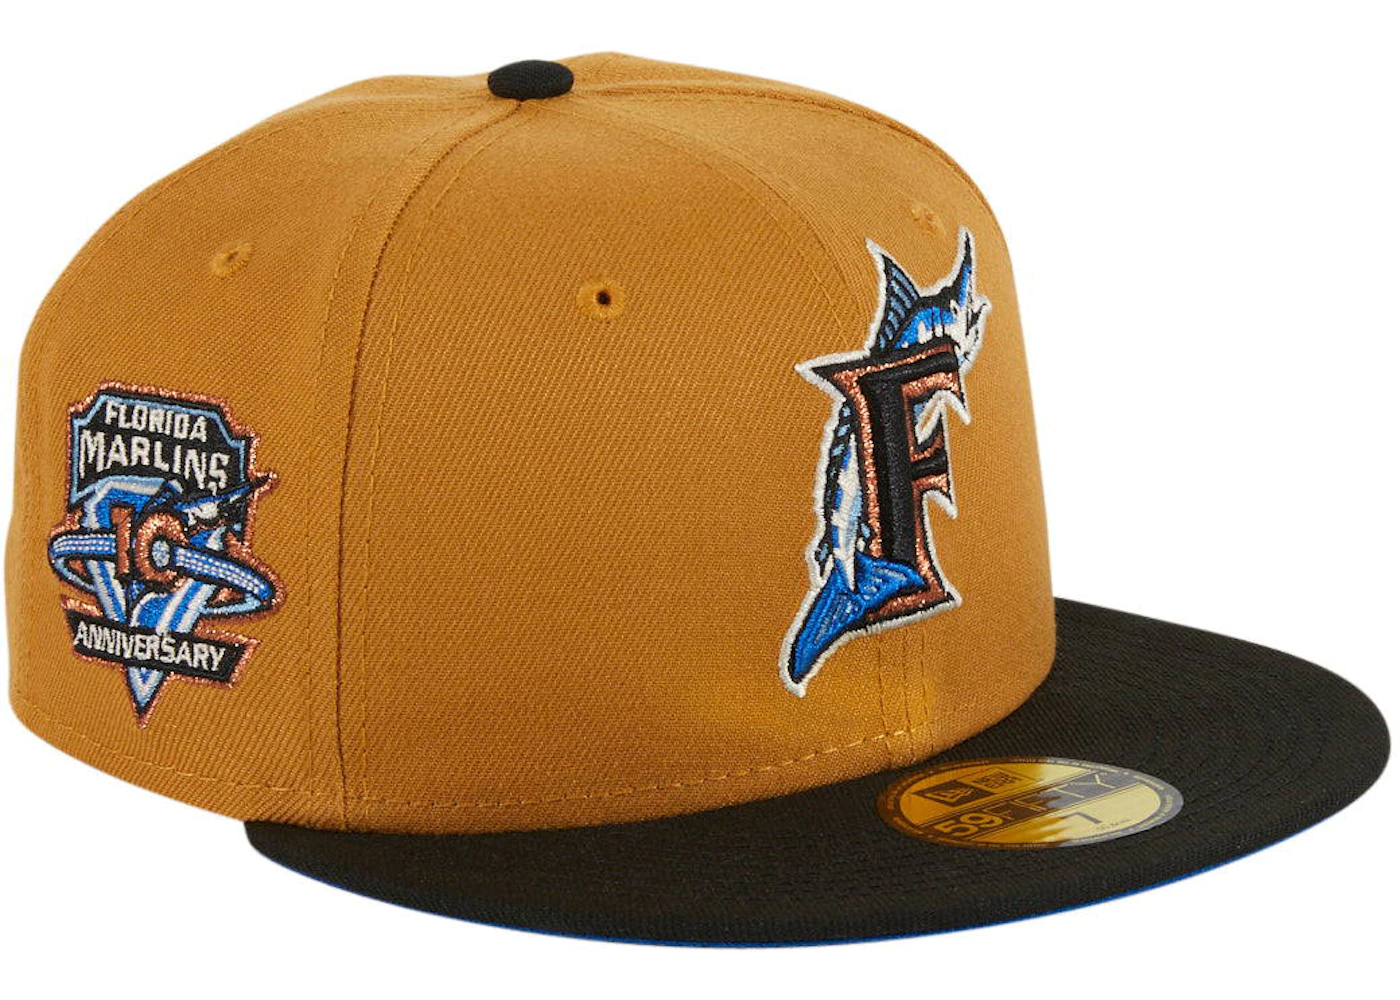 New Era Miami Marlins White Orange Pop Edition 59Fifty Fitted Cap